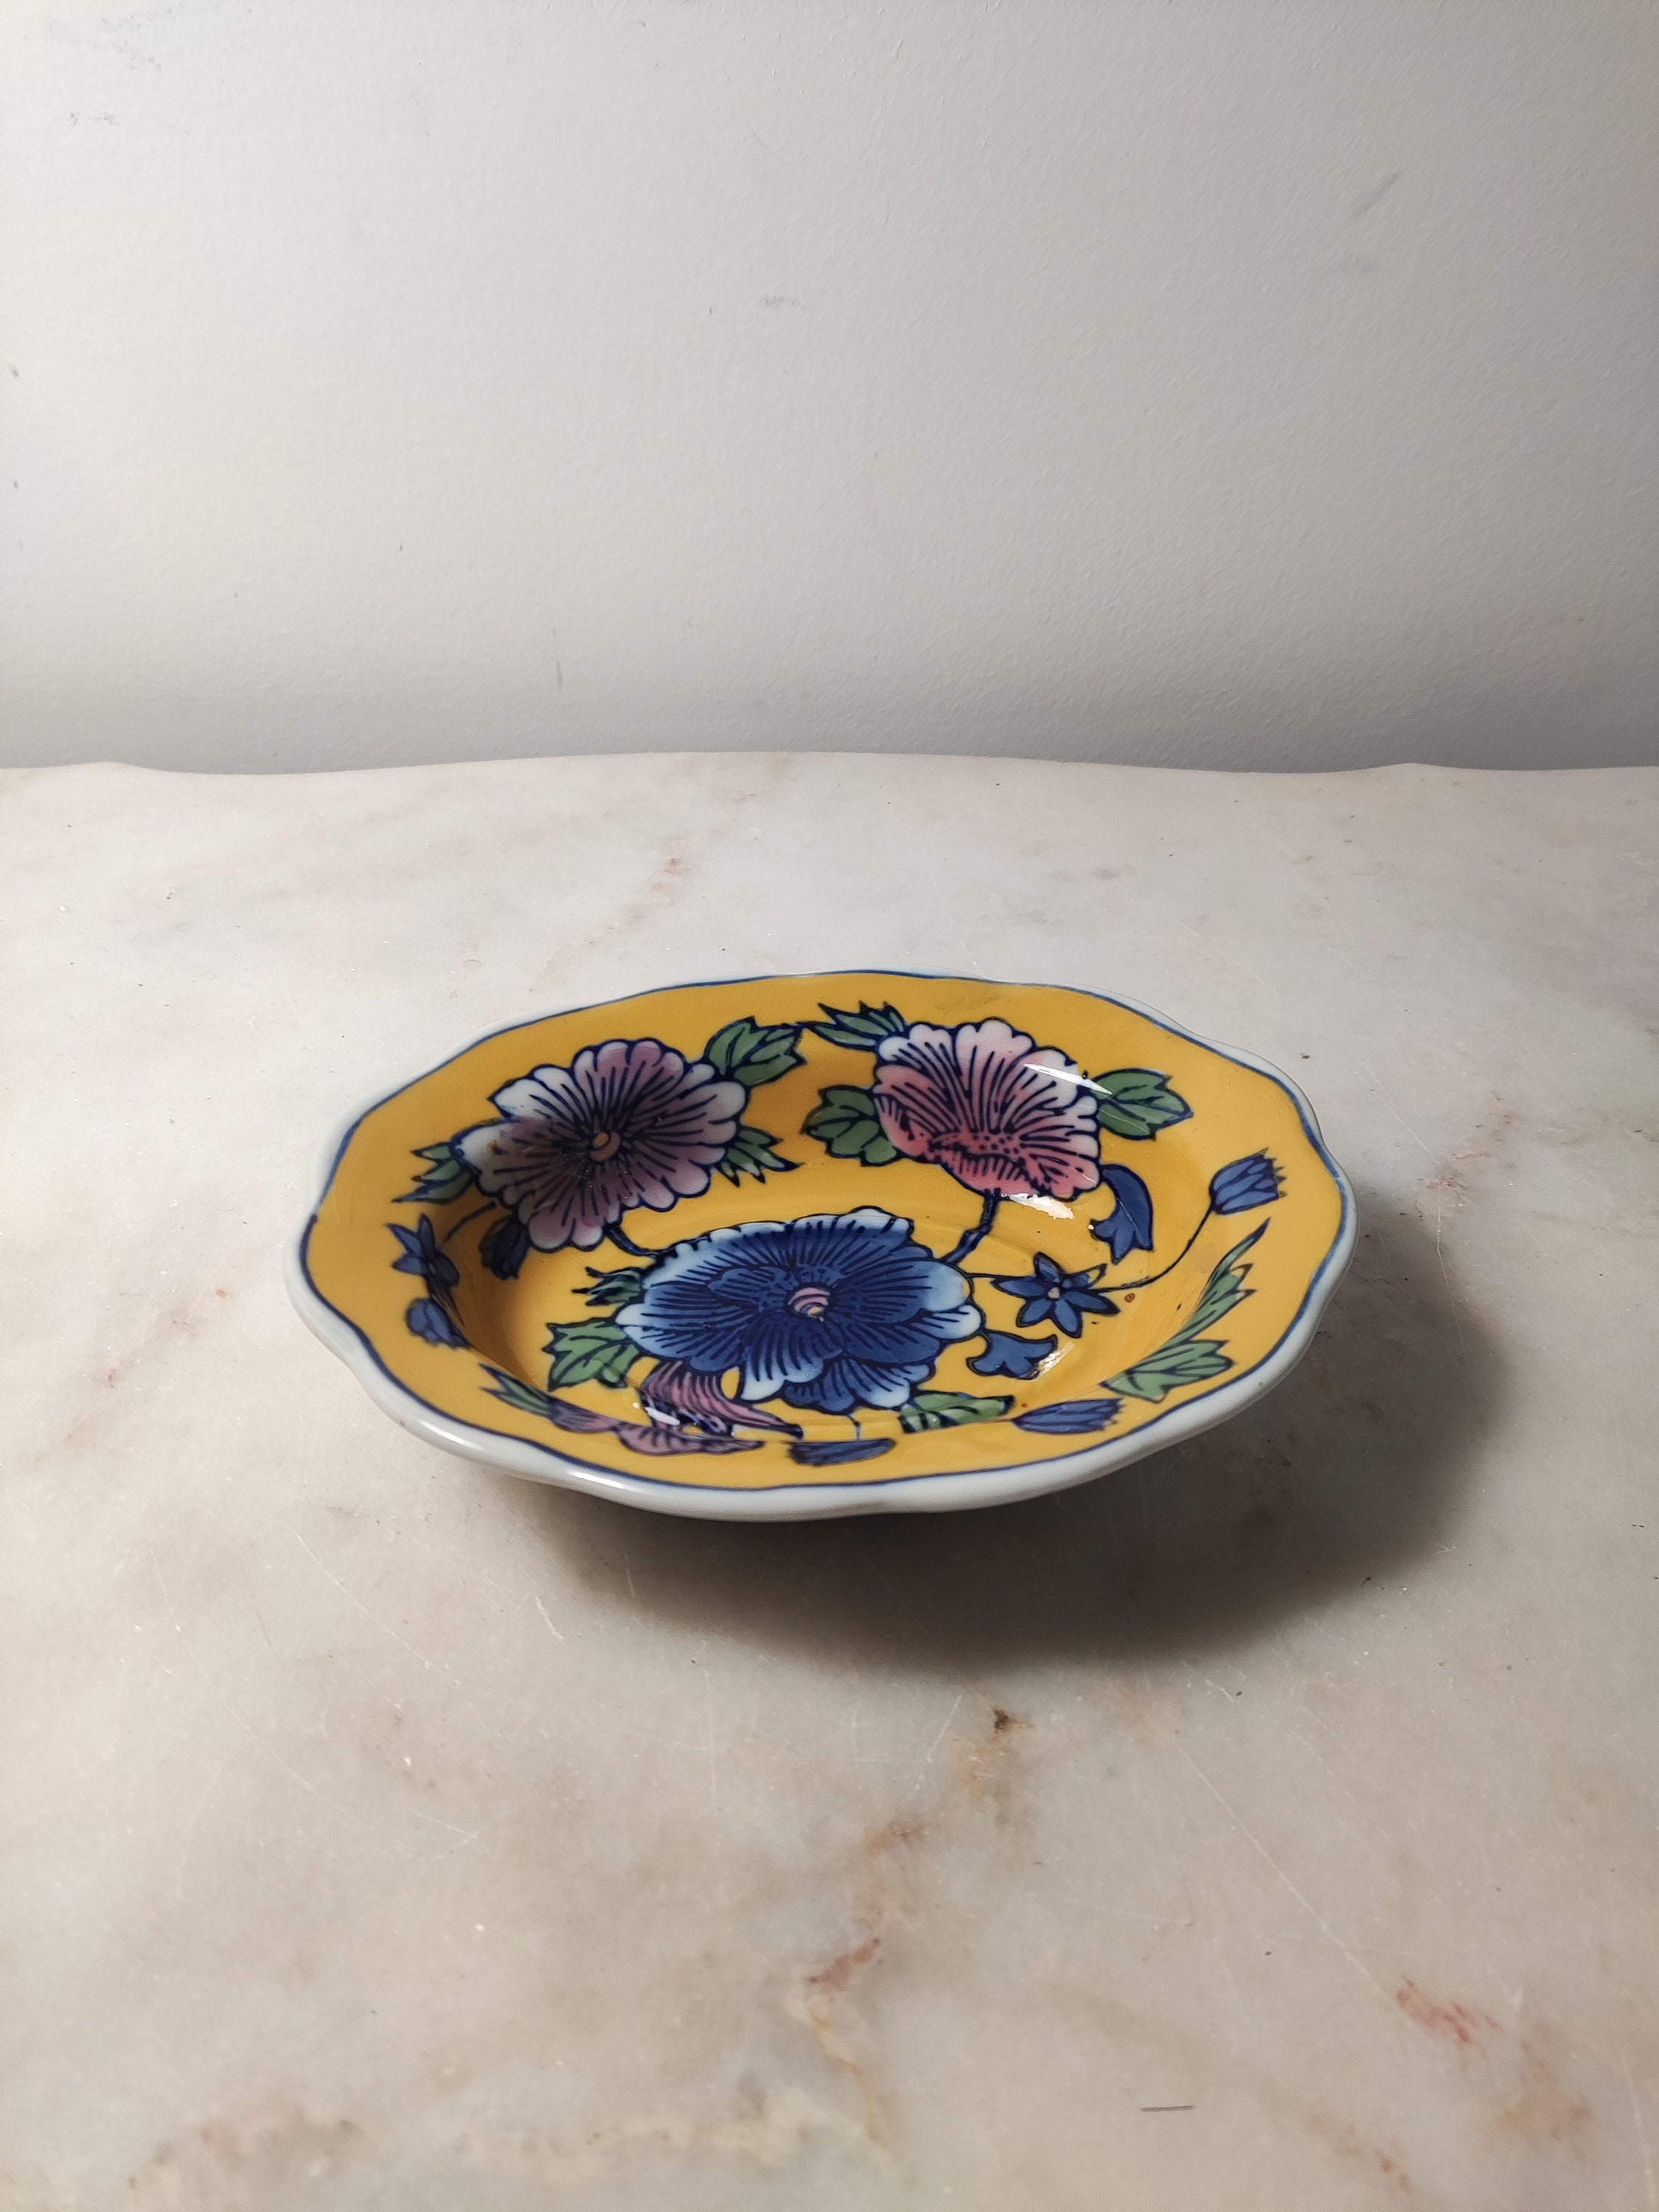 Vintage Floral Chelsea Pottery Signed Centerpiece Bowl / Tray